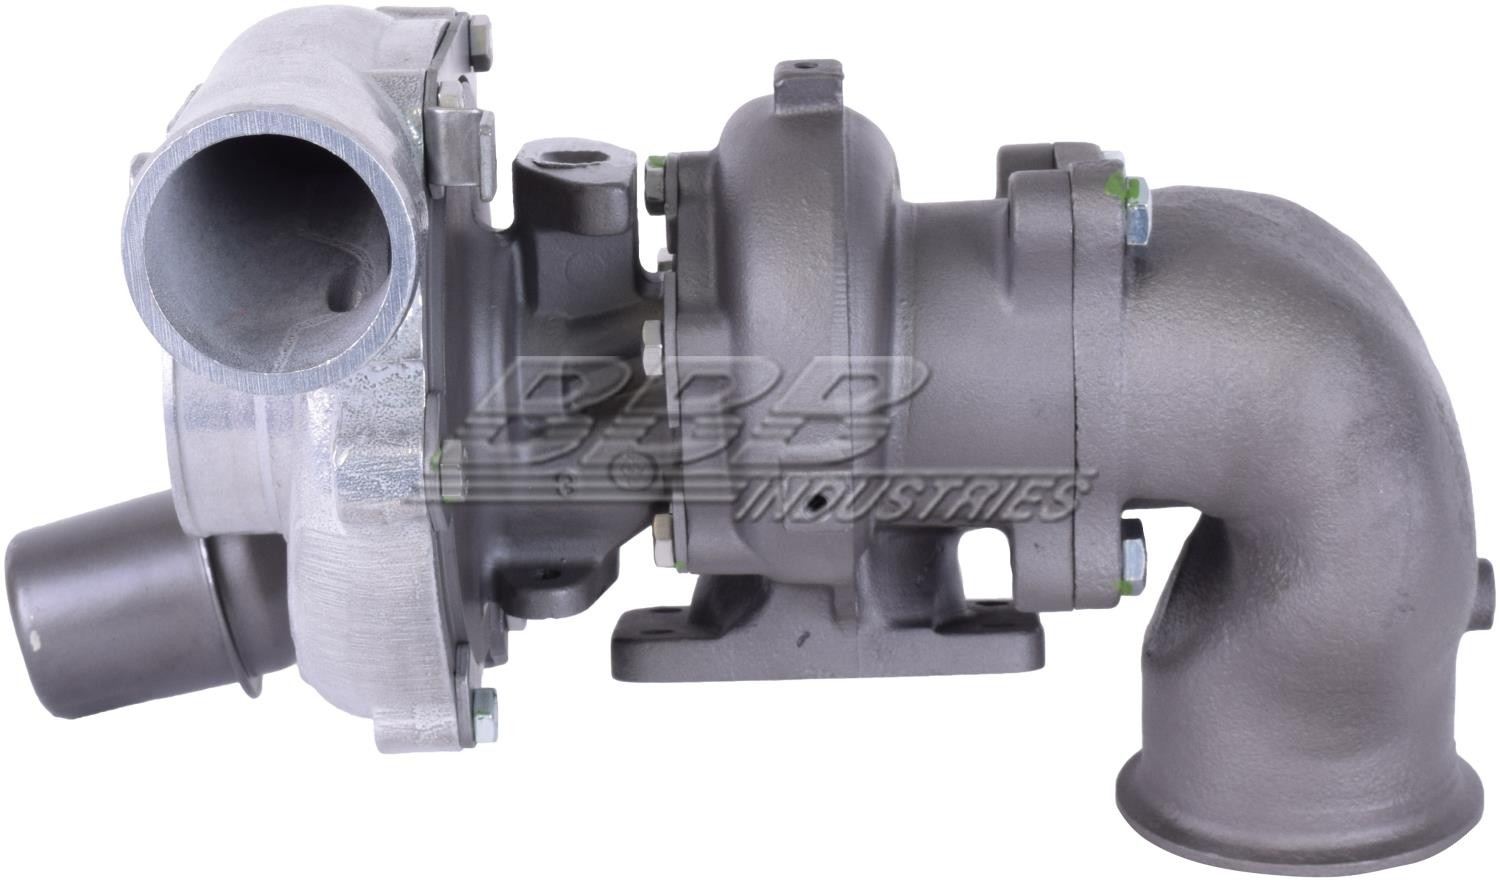 OE-TurboPower Remanufactured Turbocharger  top view frsport D3001